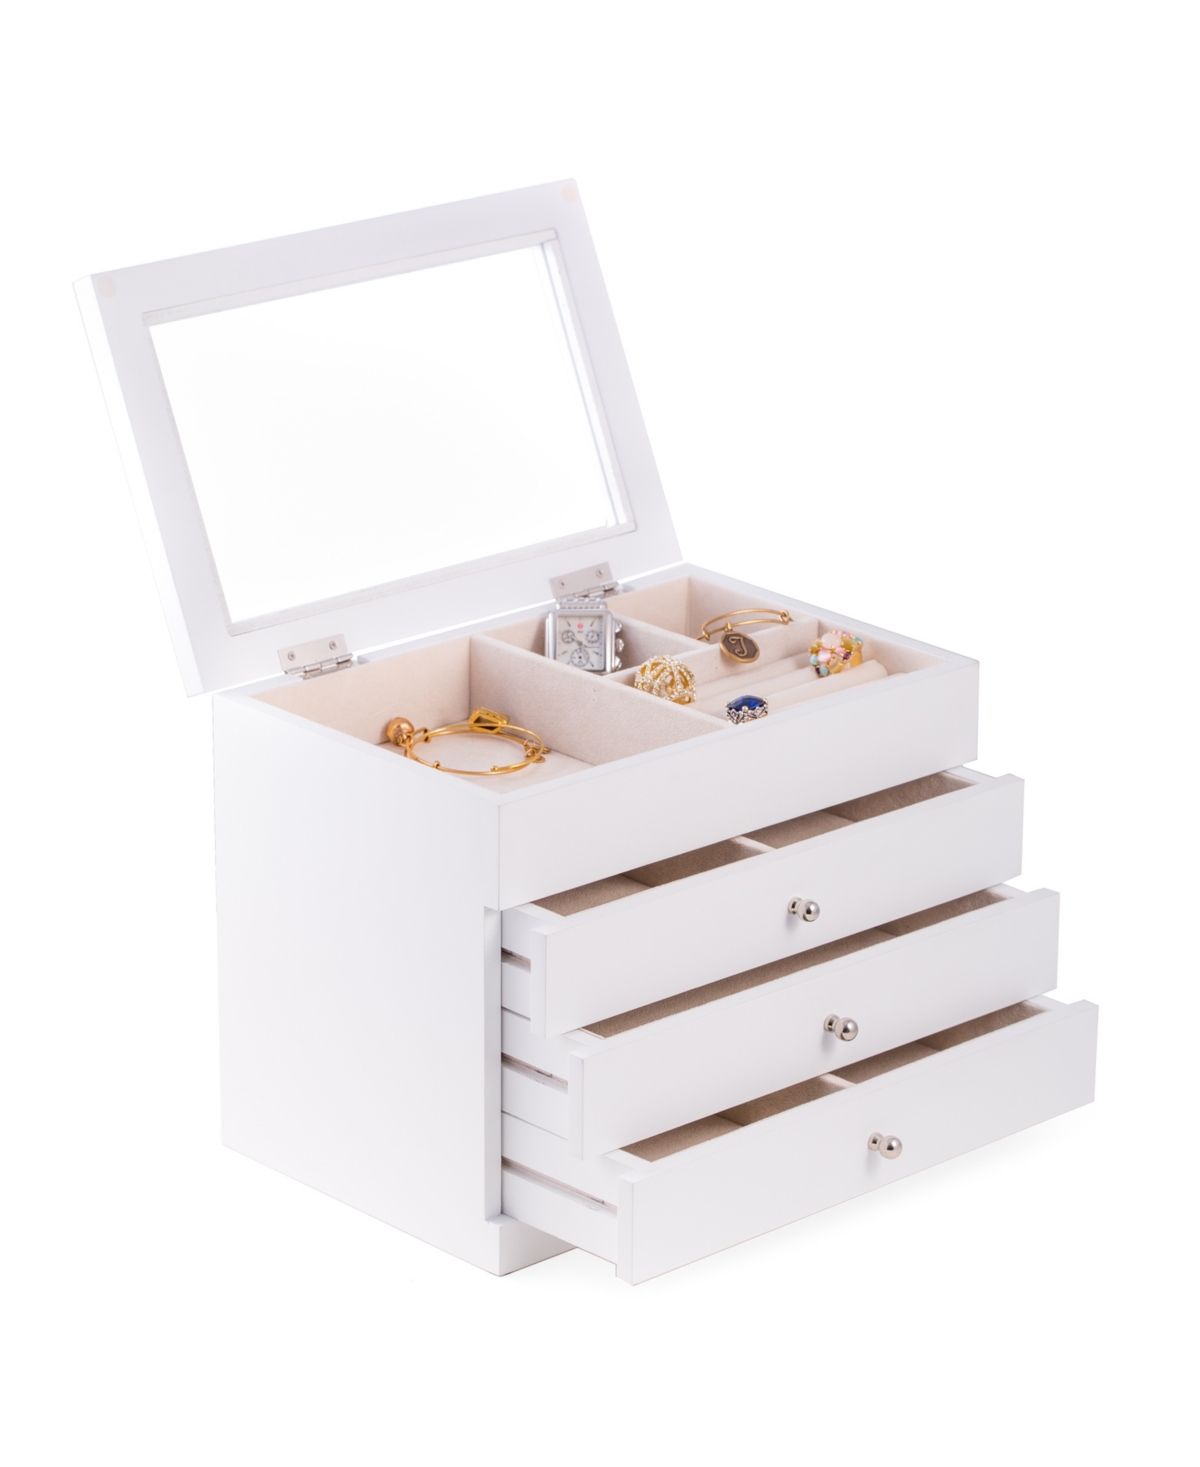 Jewelry Case with 3 Drawers and Glass see-through Top - Multi